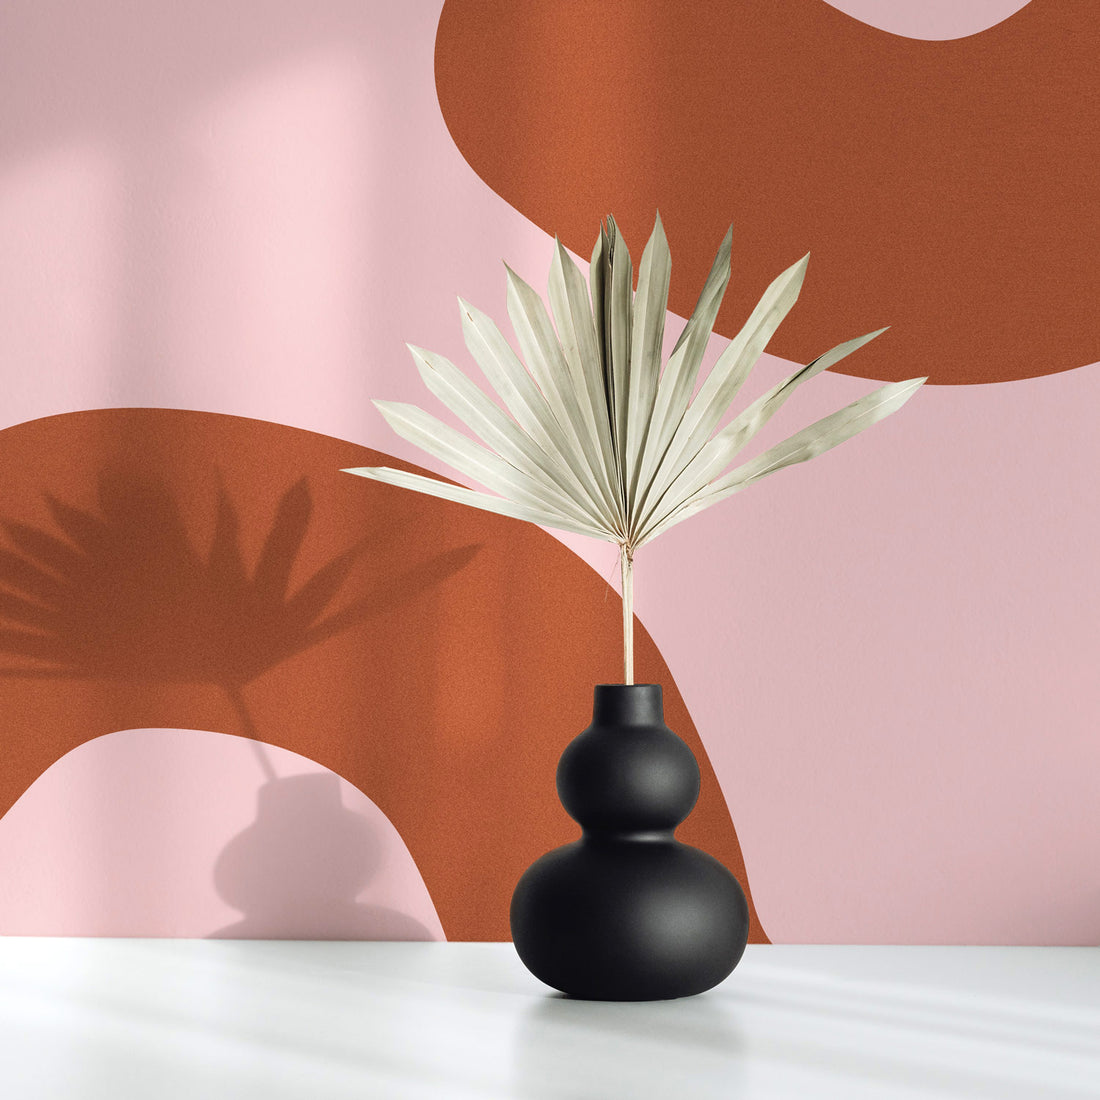 bright pink and orange removable wallpaper with fun shapes